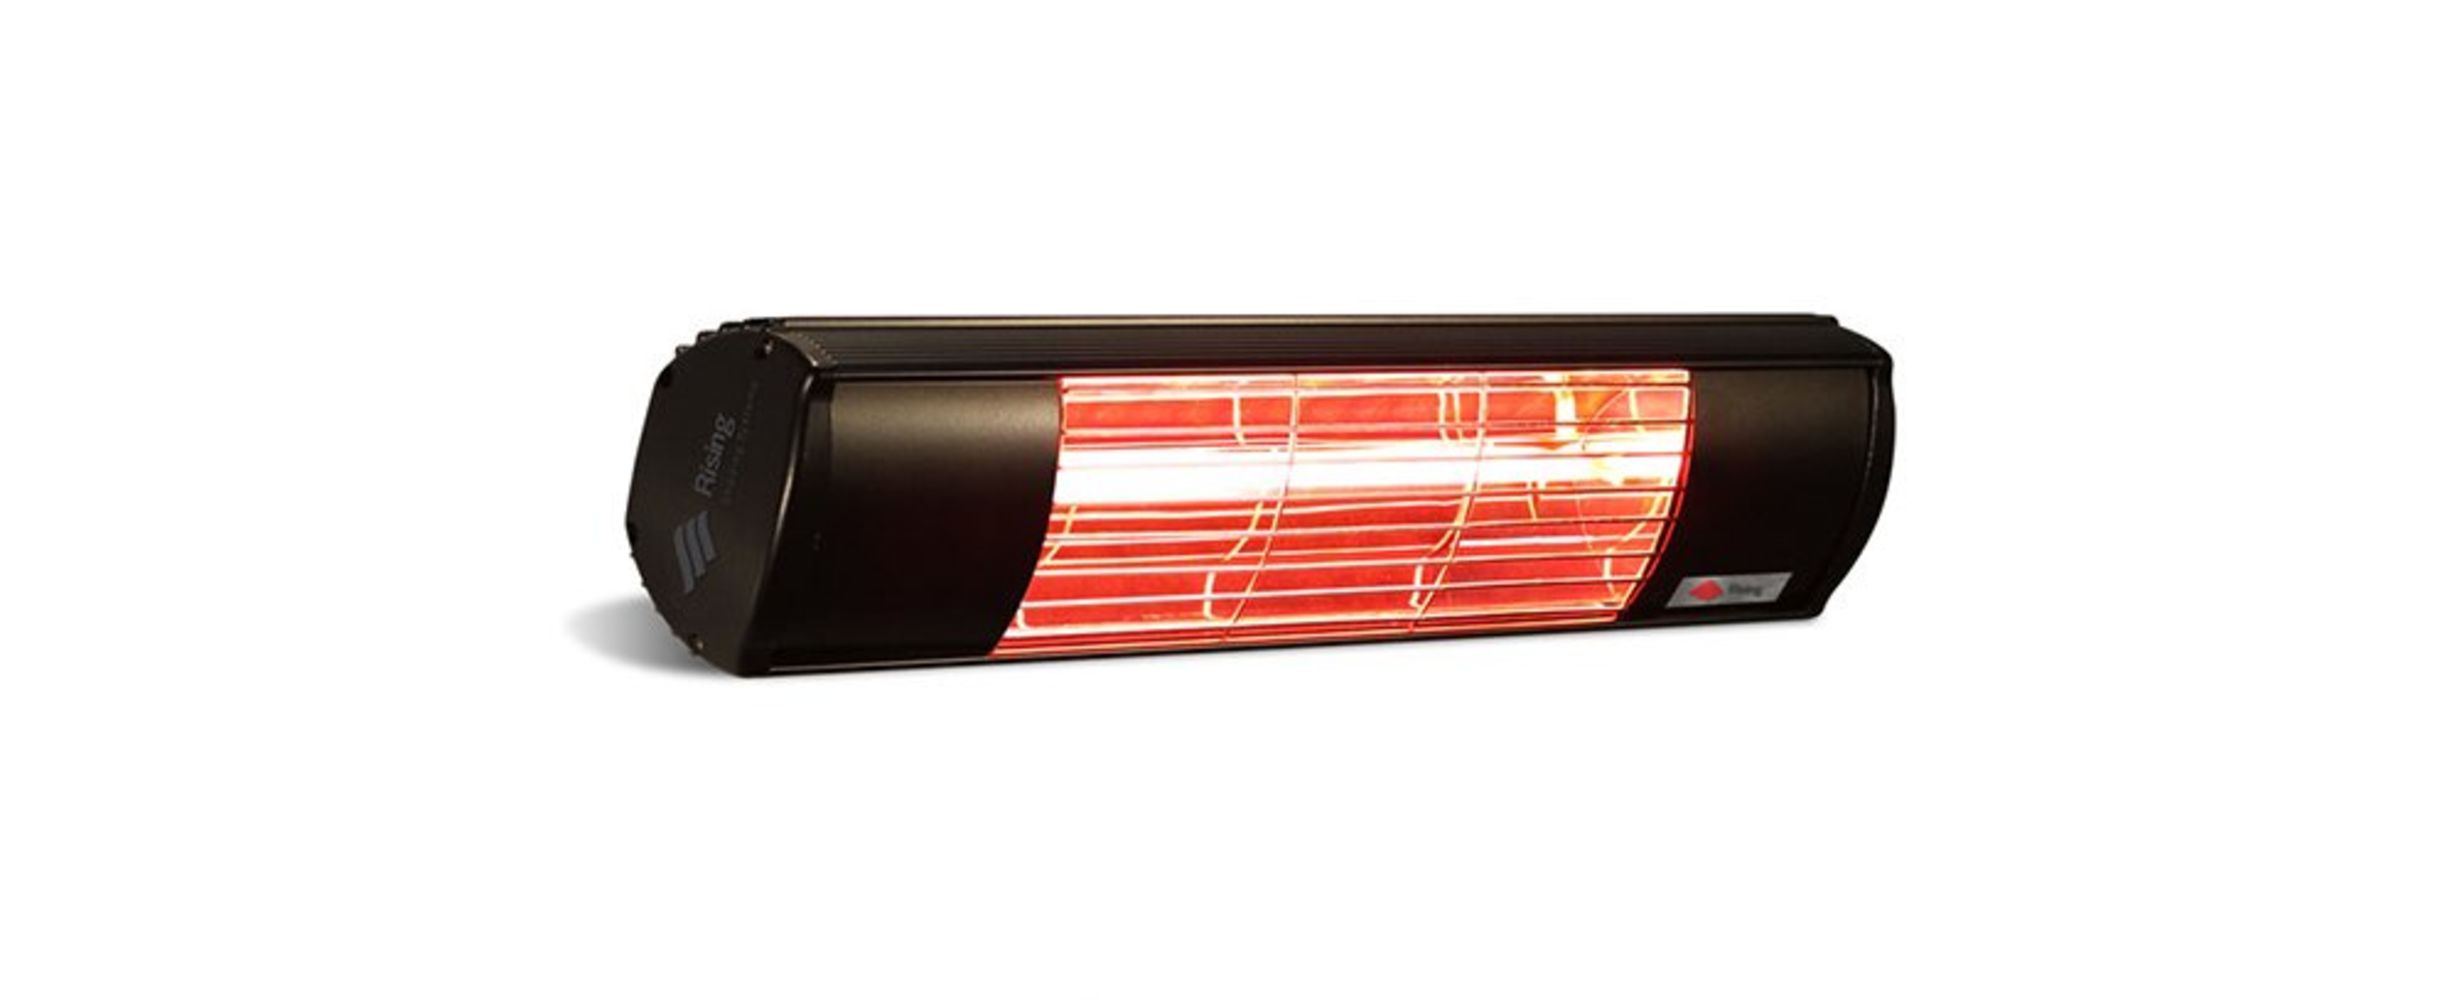 Warehouse liquidation of high quality infrared wall heaters at low starting prices and just 10% buyers premium